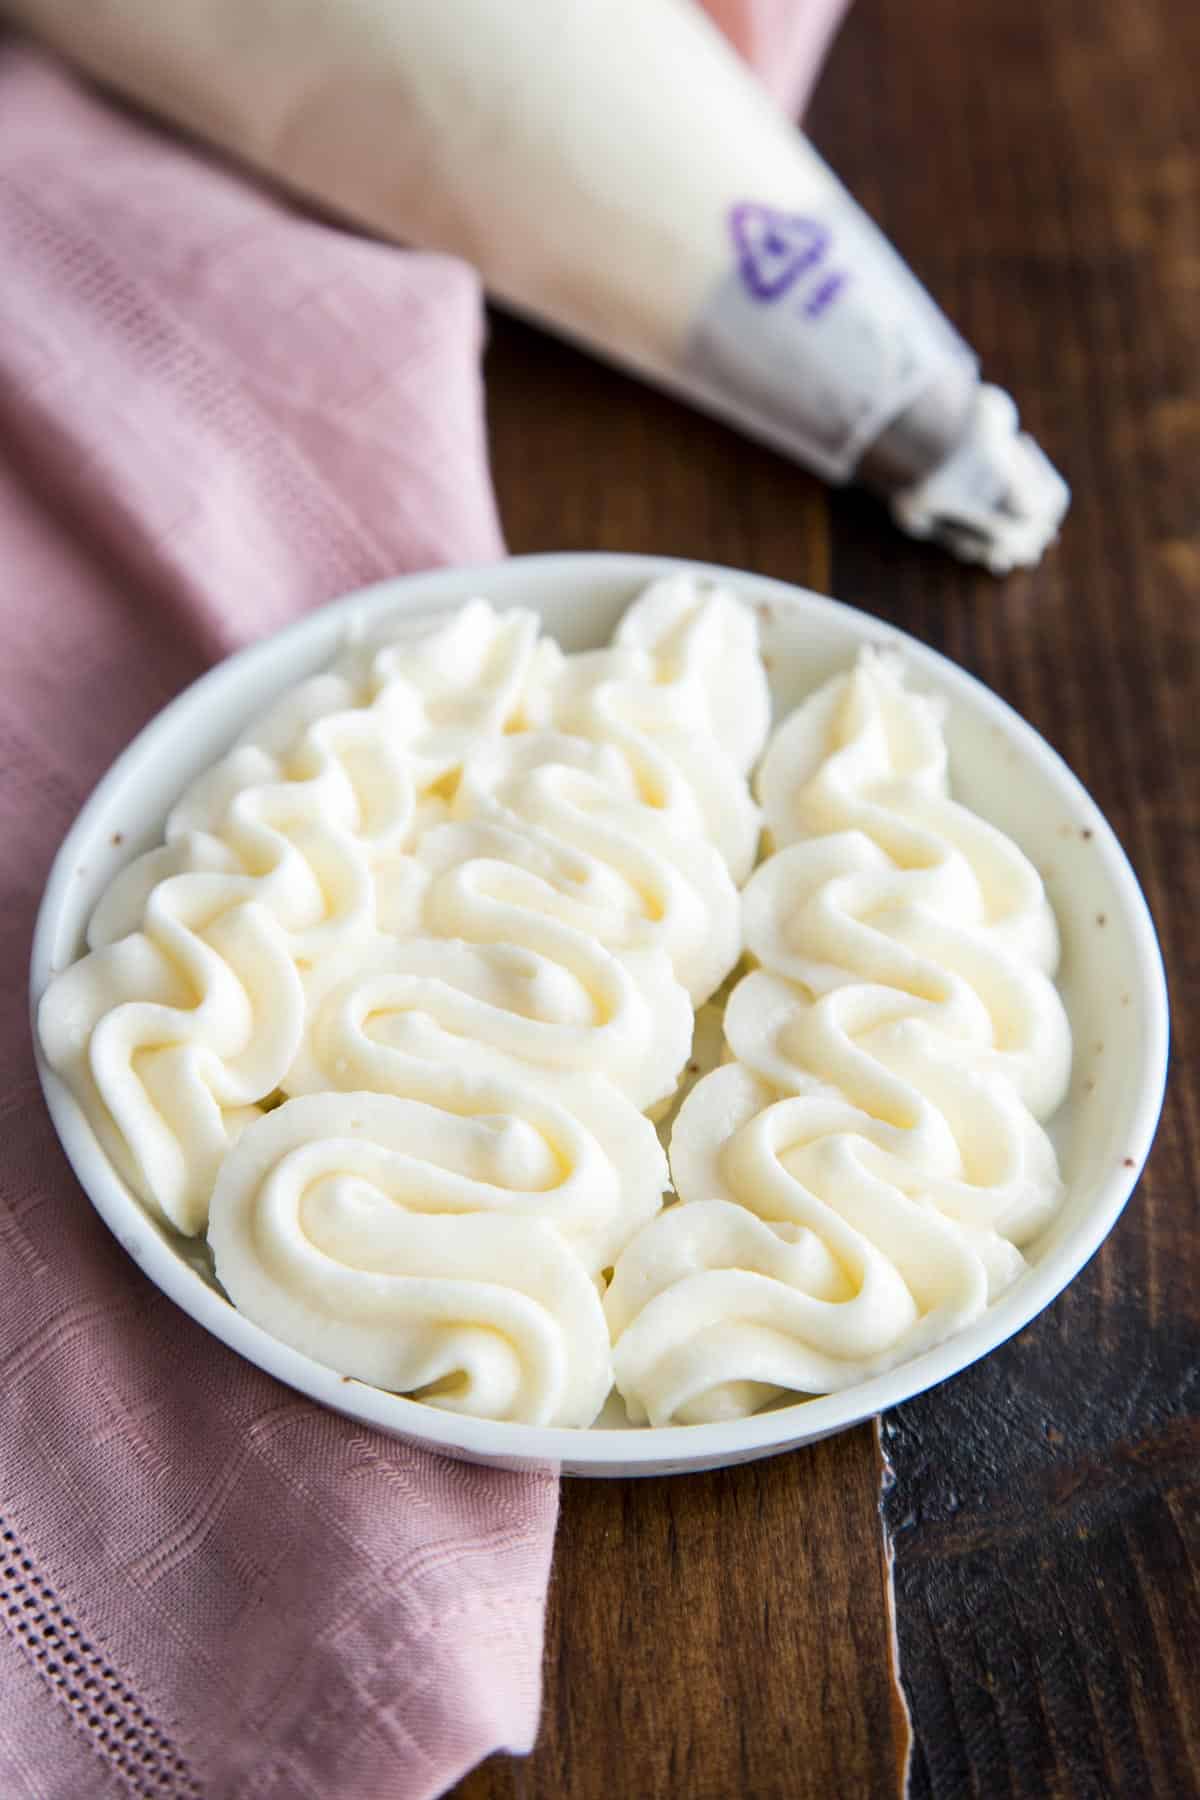 Cream cheese frosting piped on a plate.